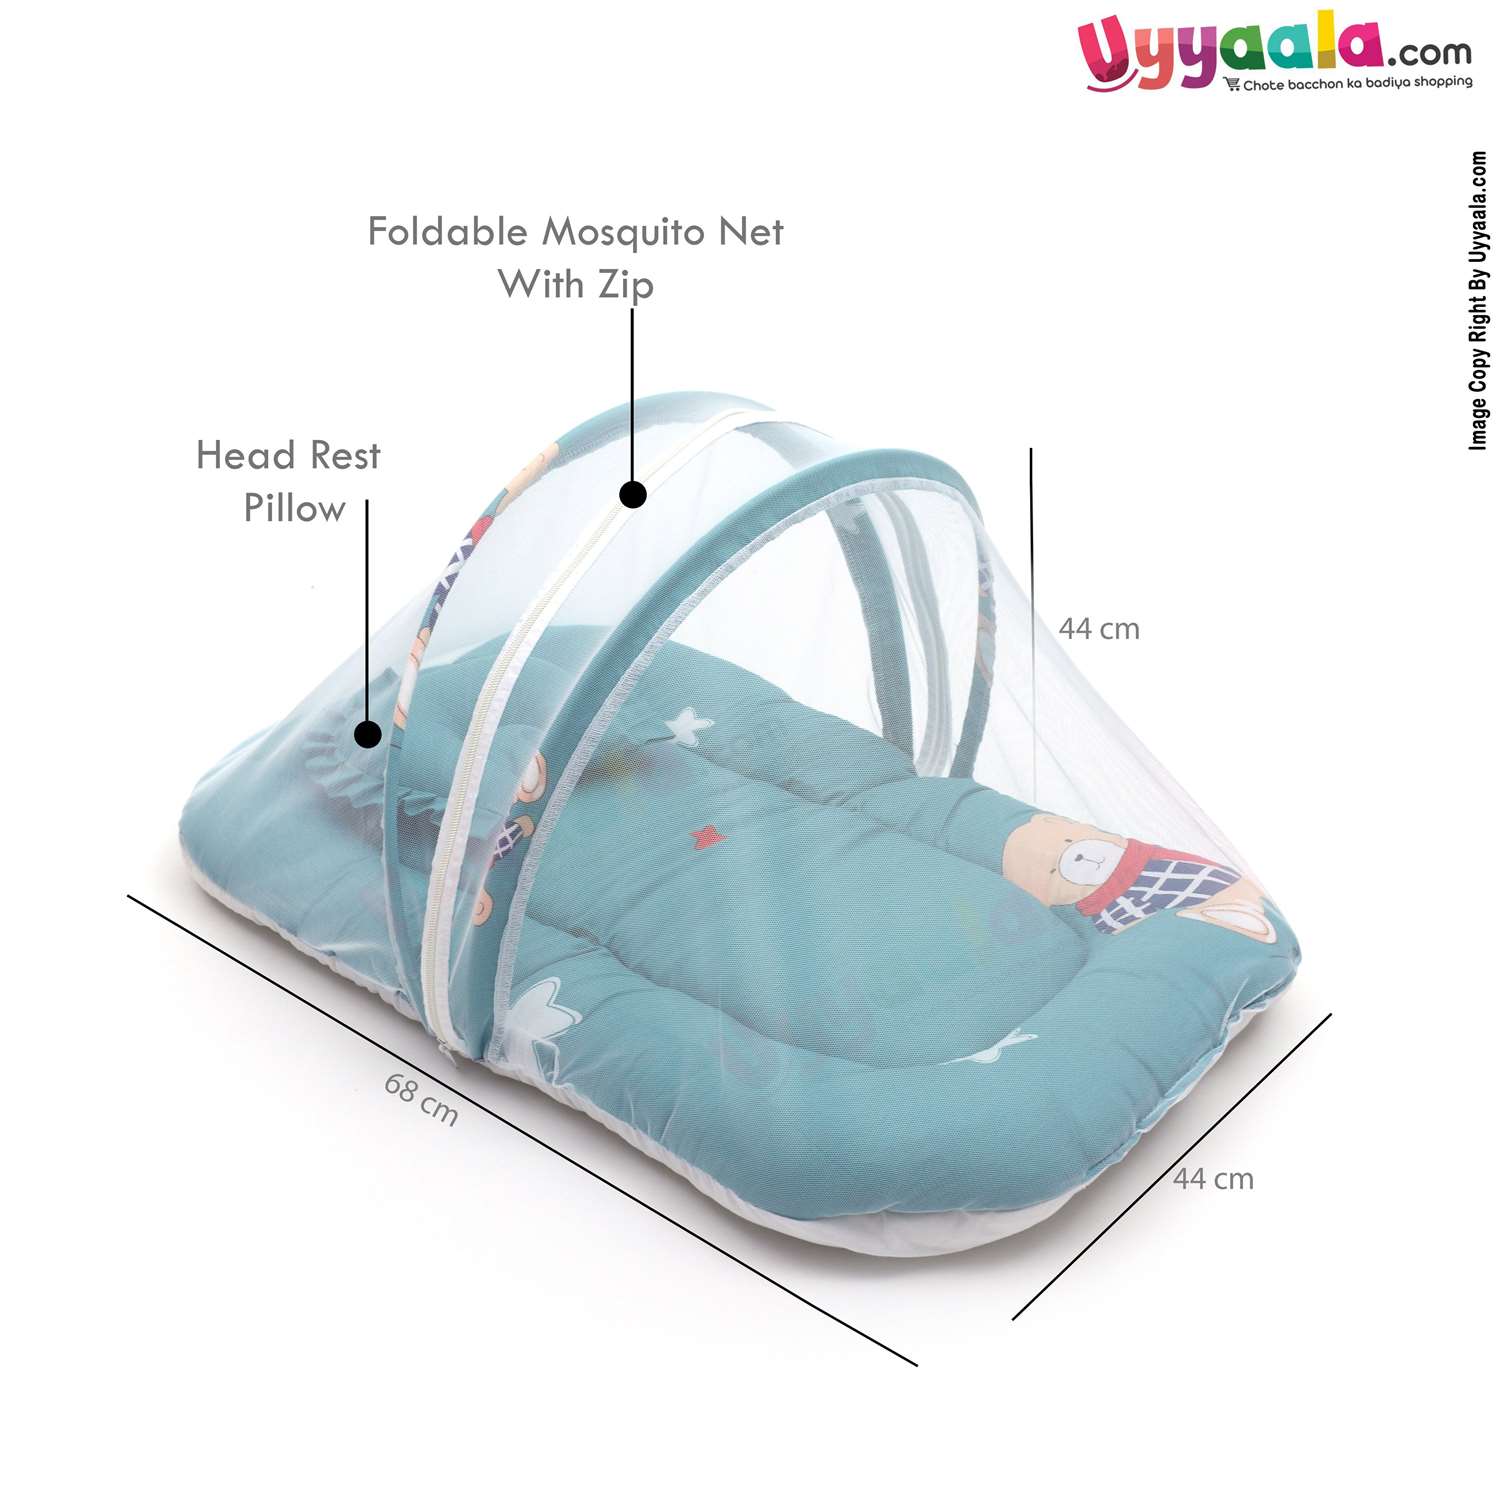 Bedding Set with Mosquito Protection Net & Pillow for babies